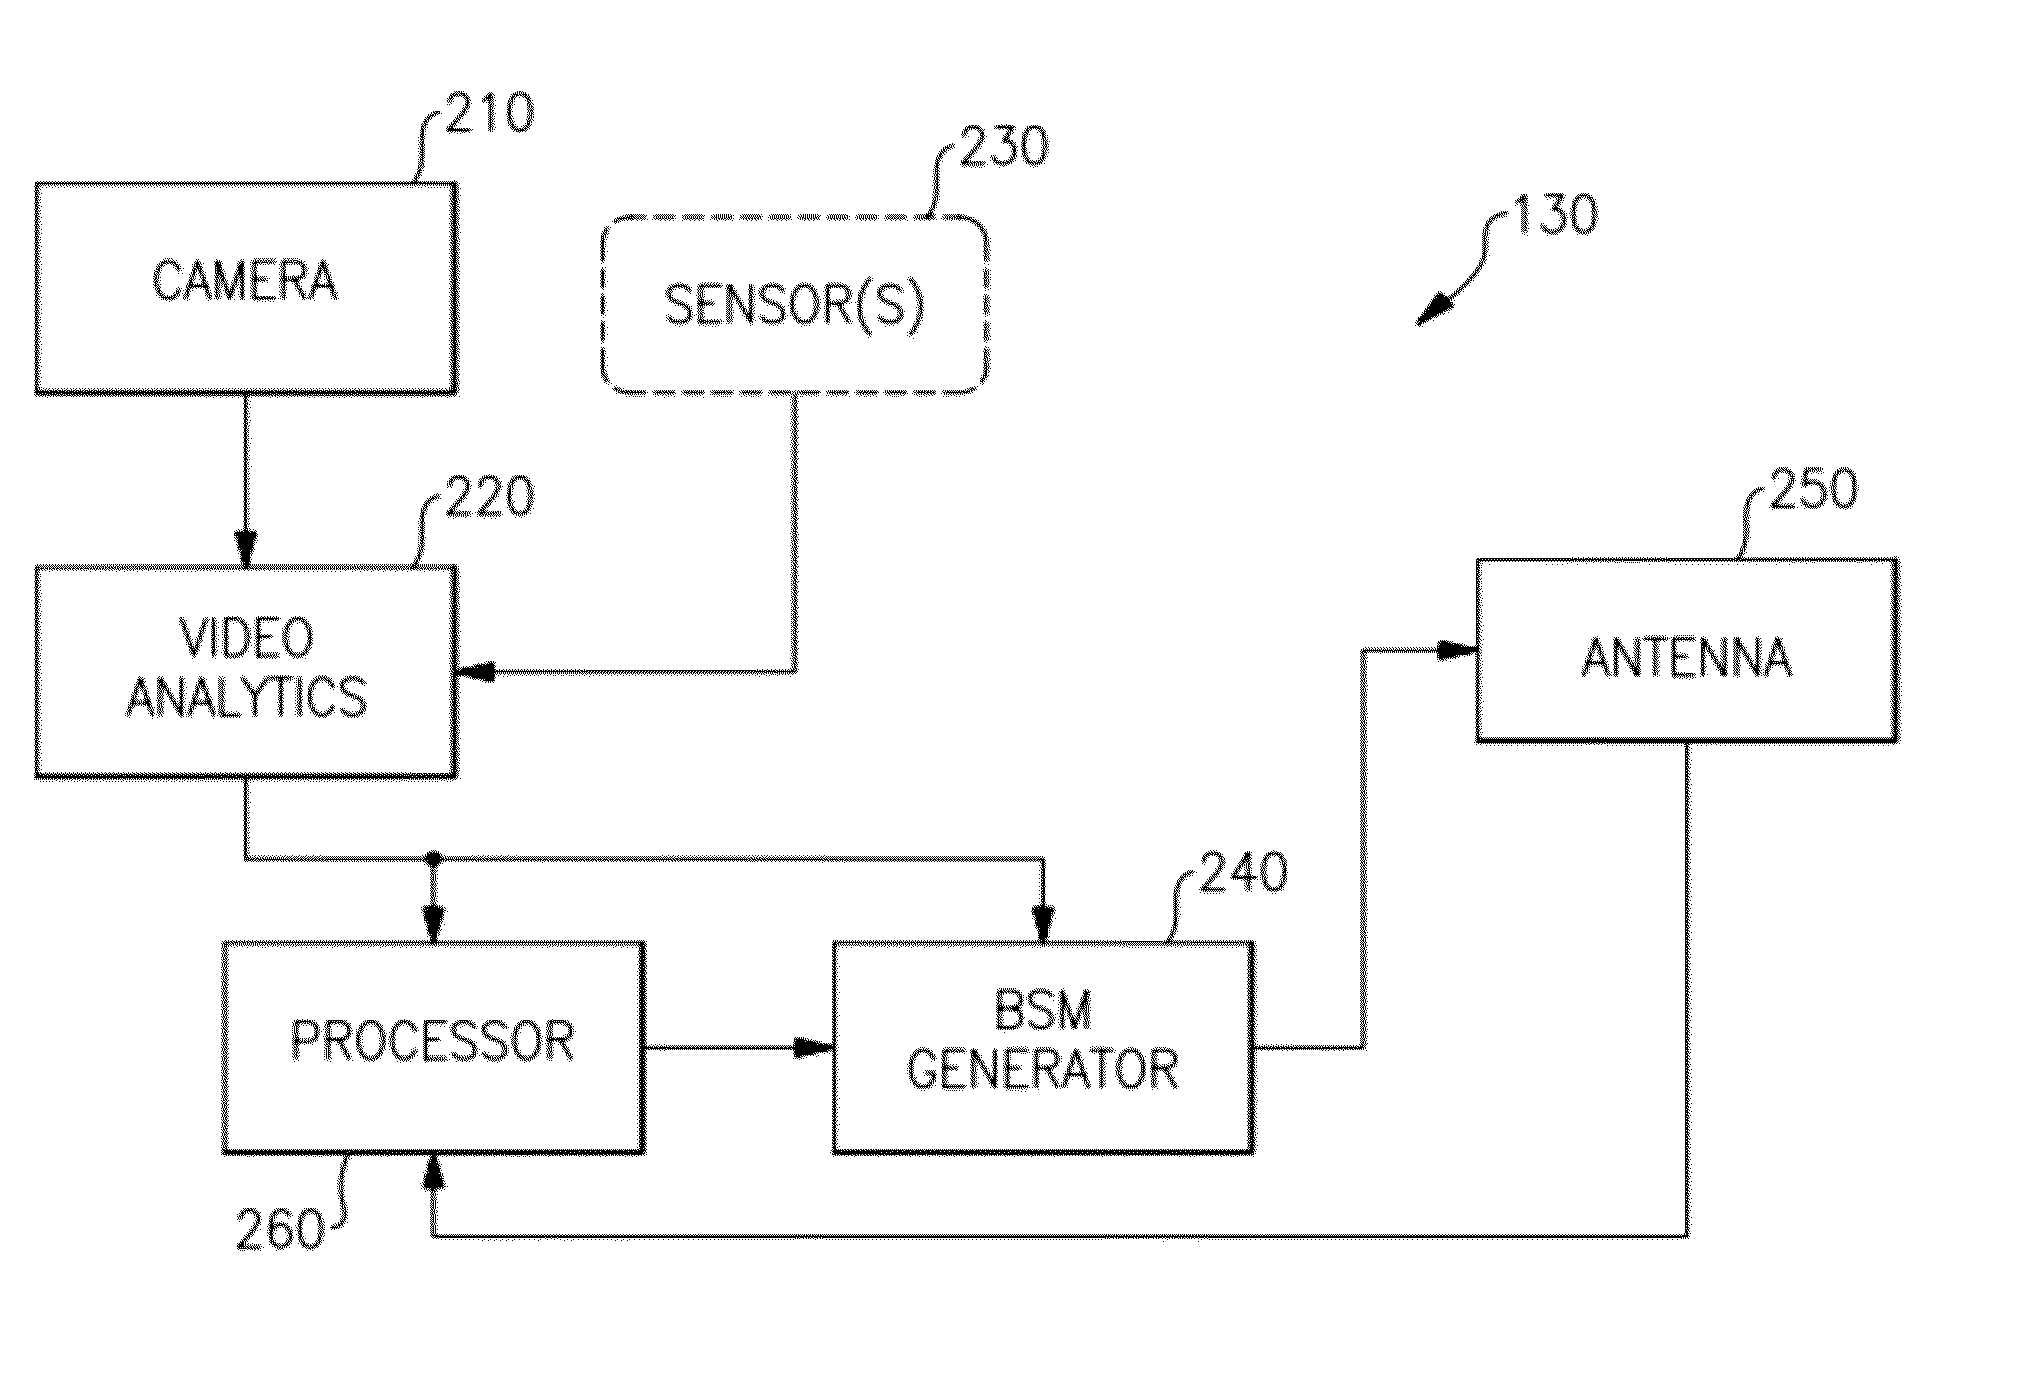 Method and apparatus for generating infrastructure-based basic safety message data